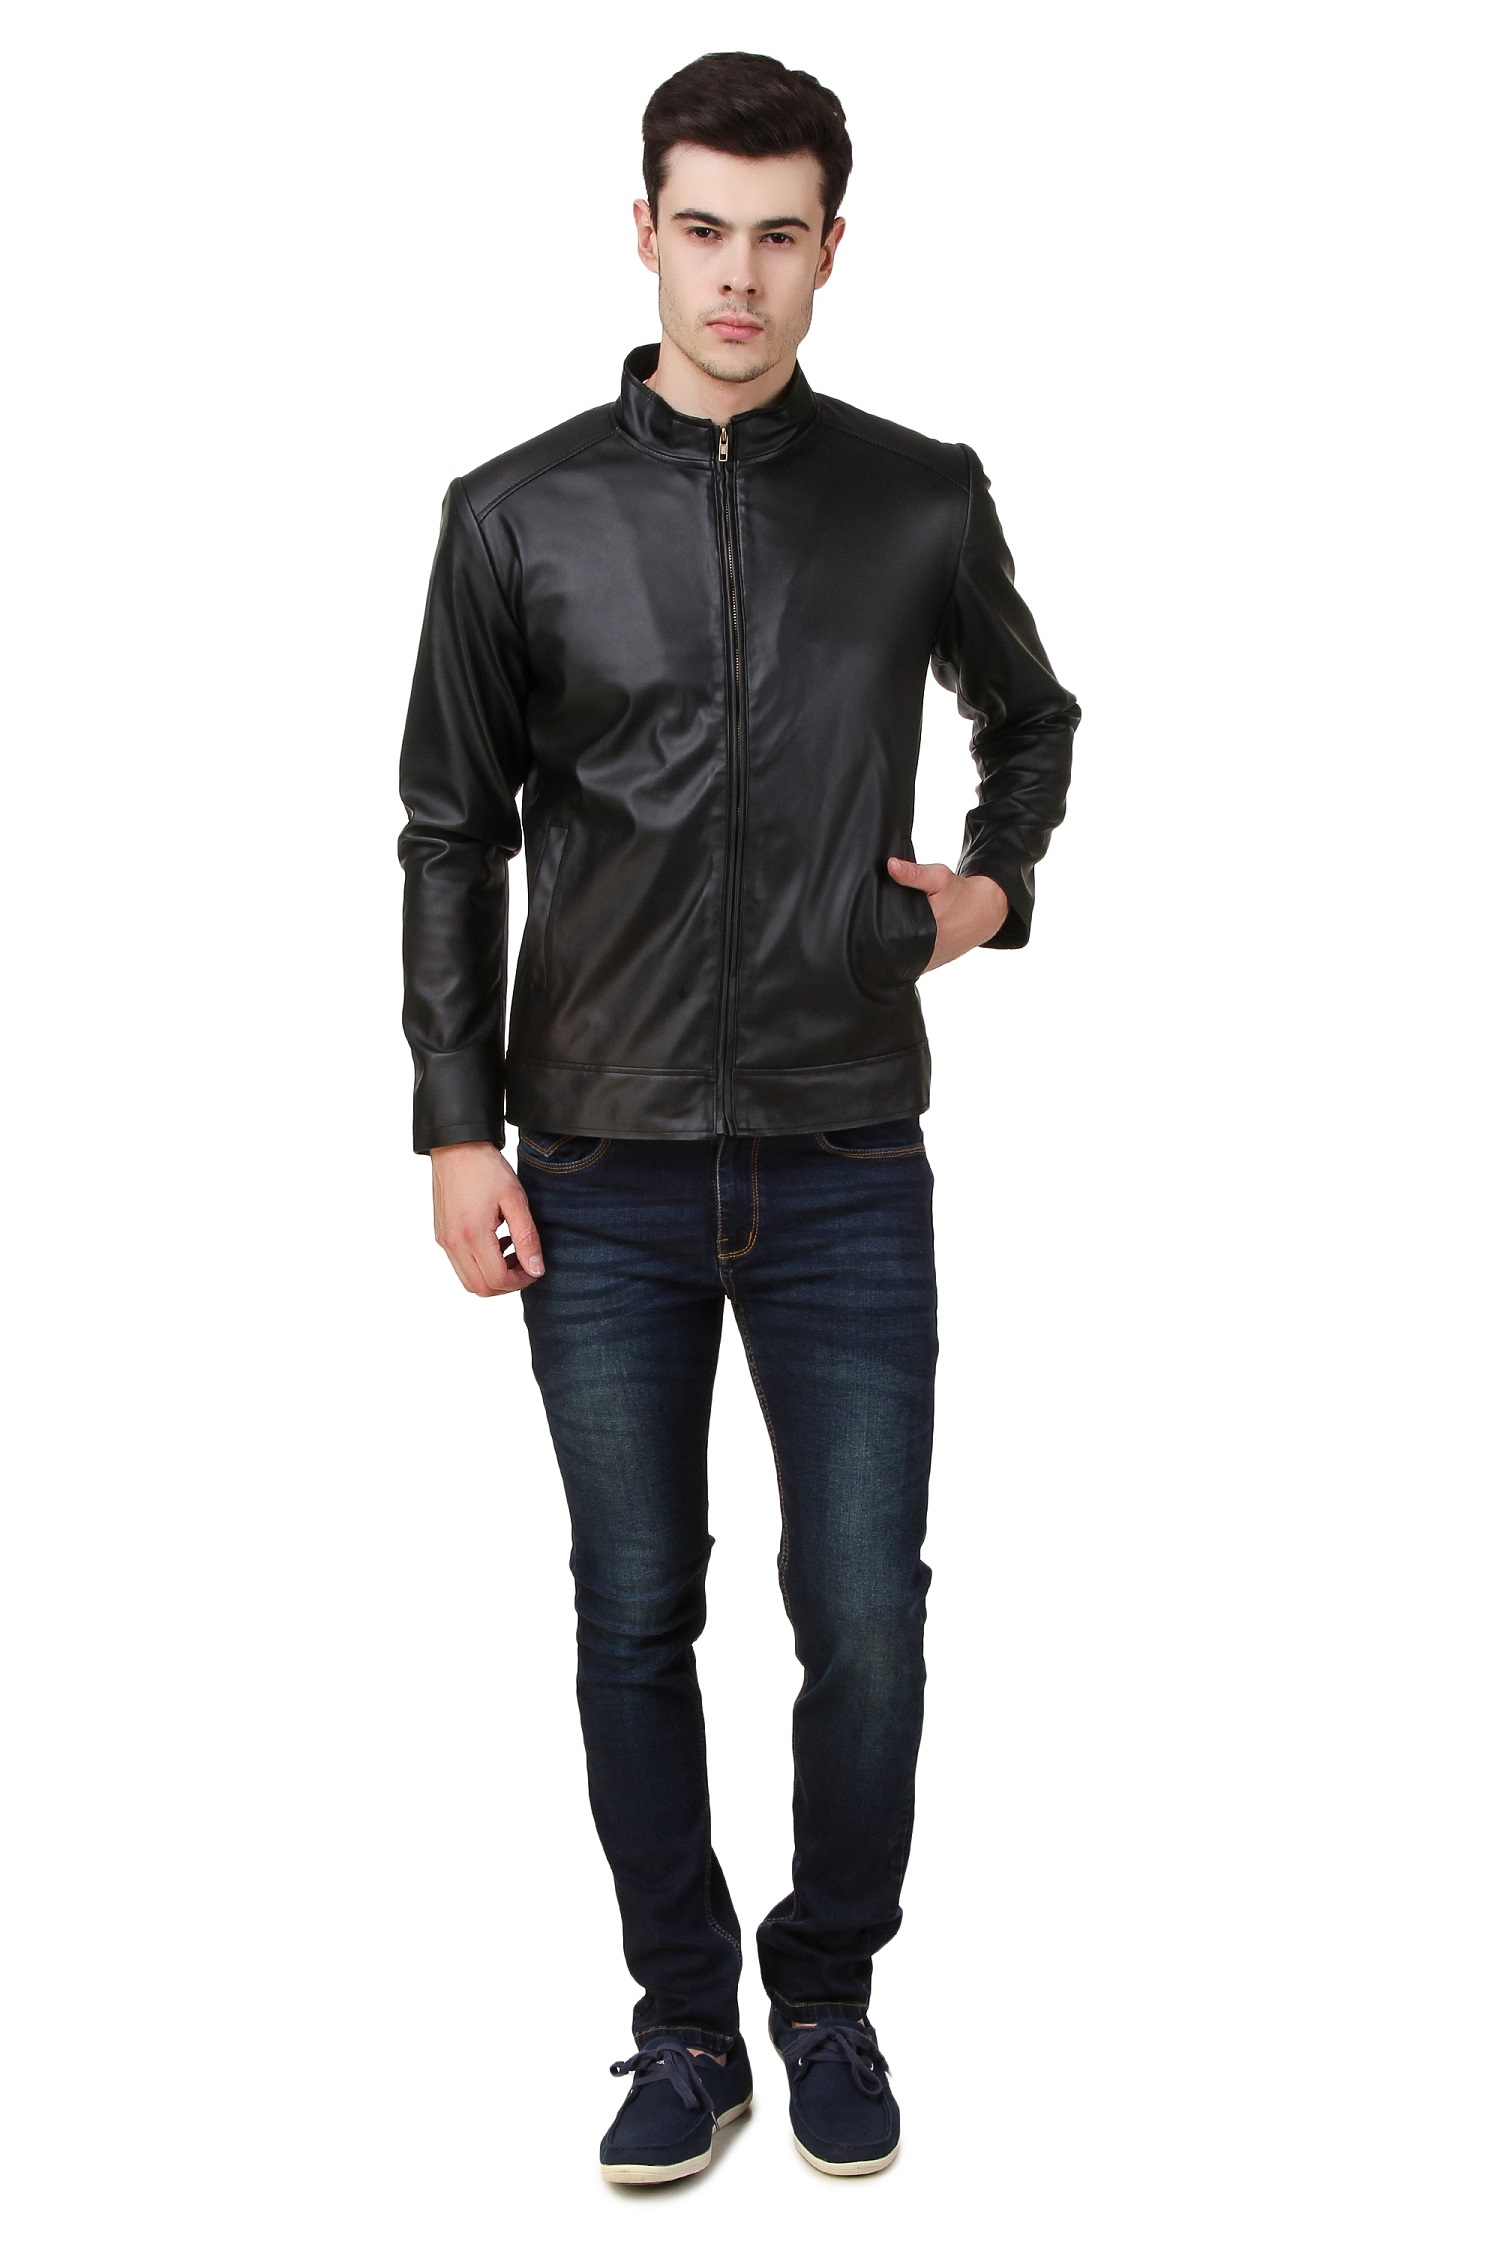 Buy Leather Retail Black Plain Jacket Online @ ₹1499 from ShopClues